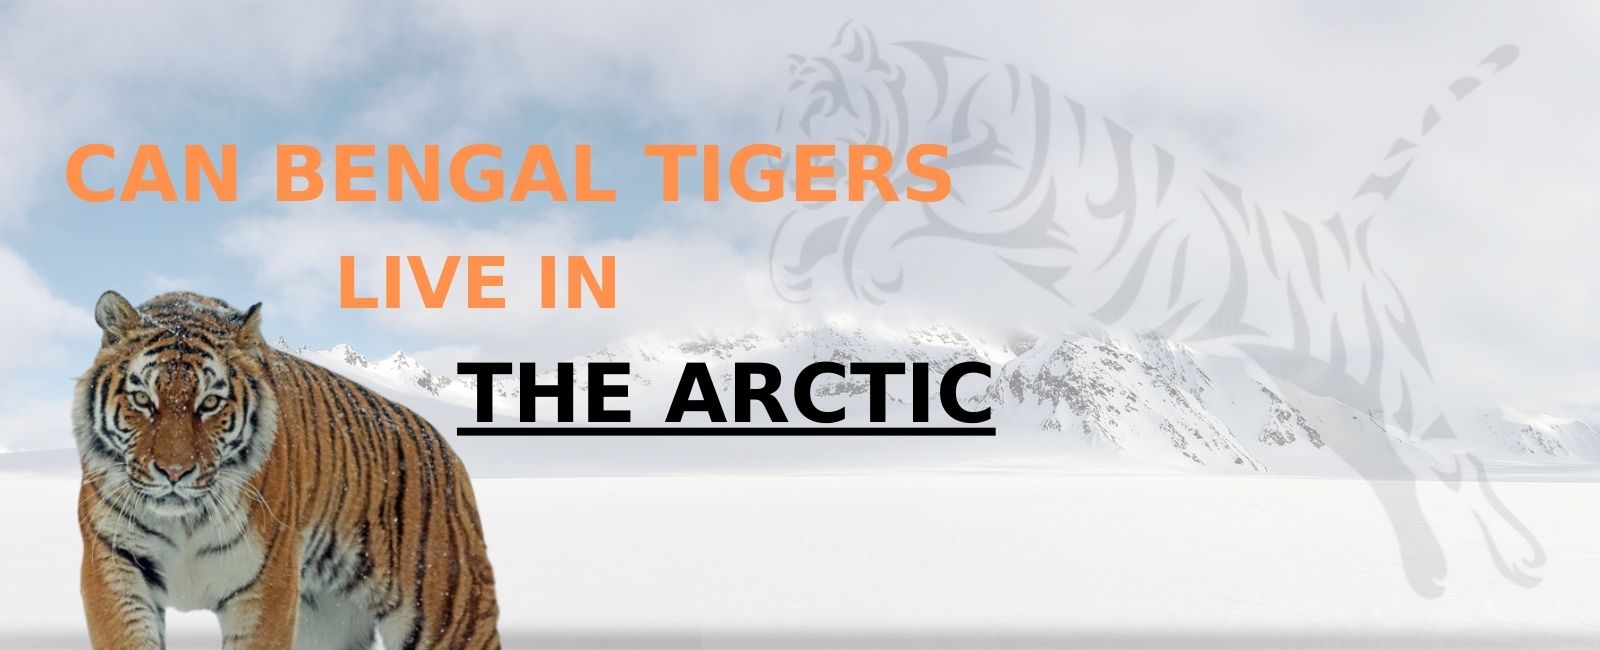 Can Bengal tigers live in the Arctic?